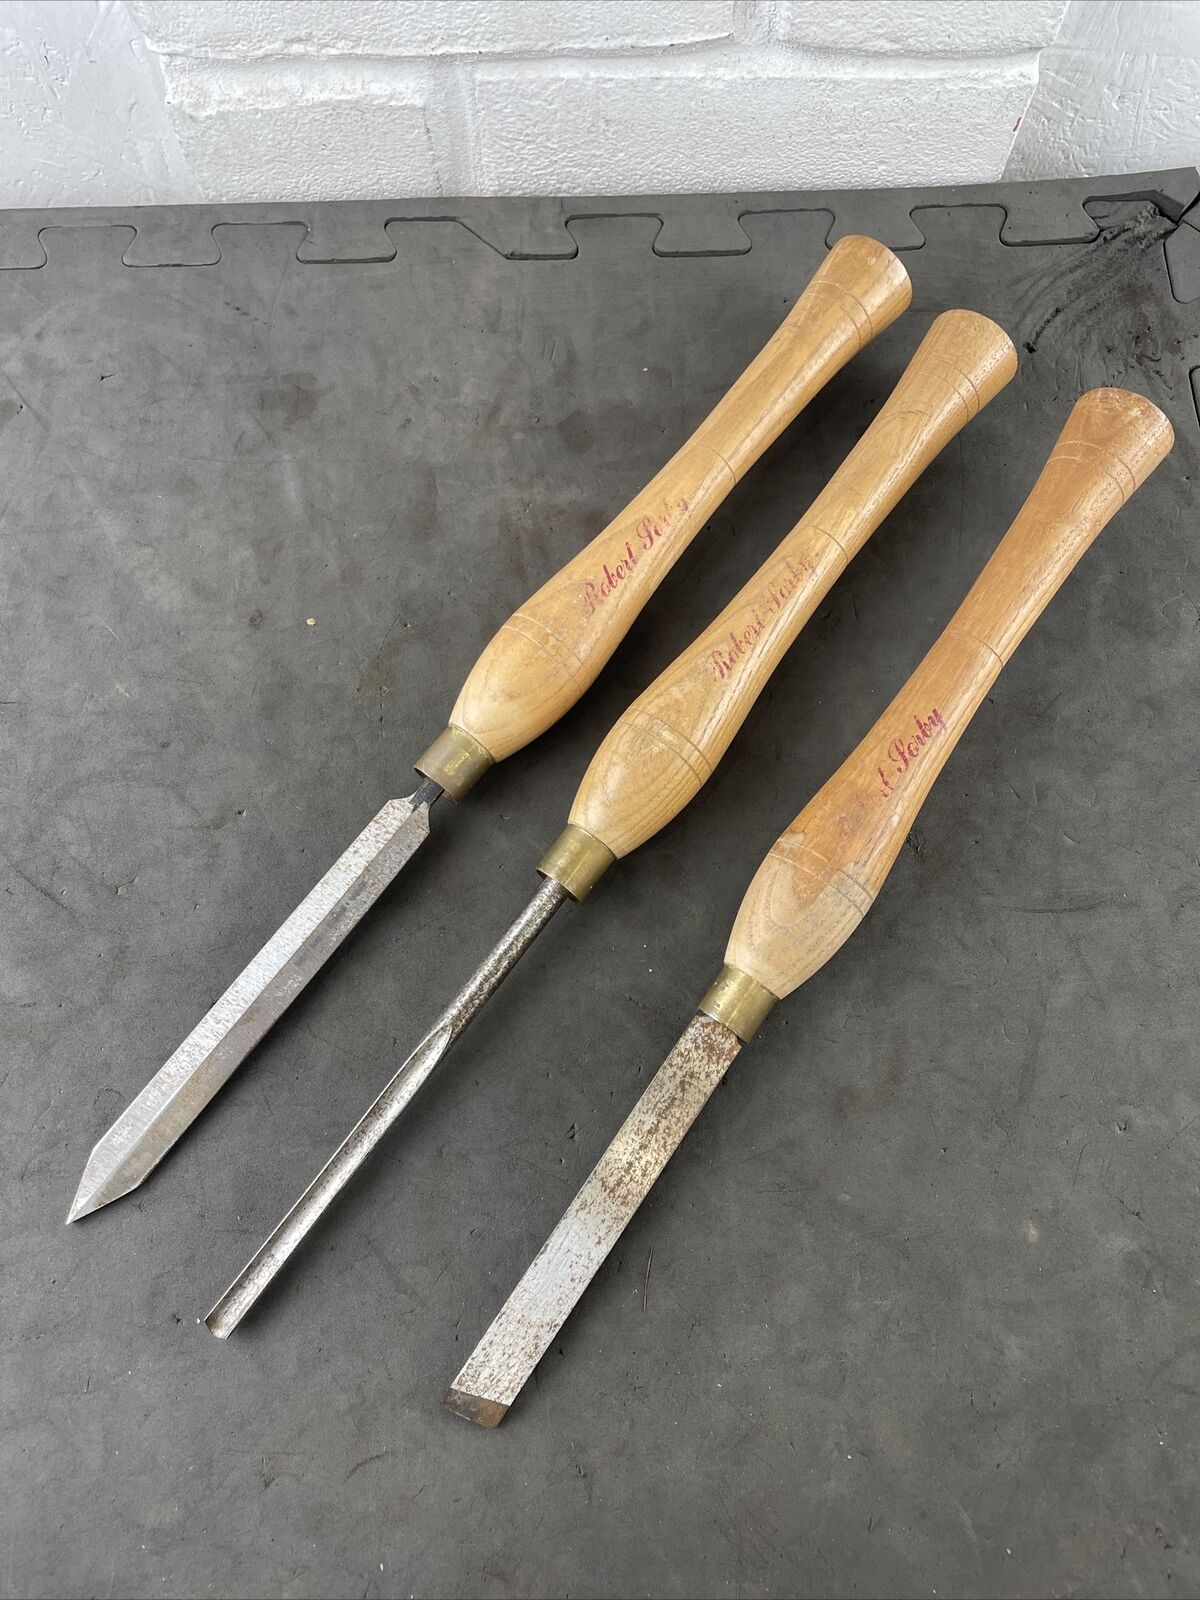 3 large Robert Sorby Wood Turning Chisels 